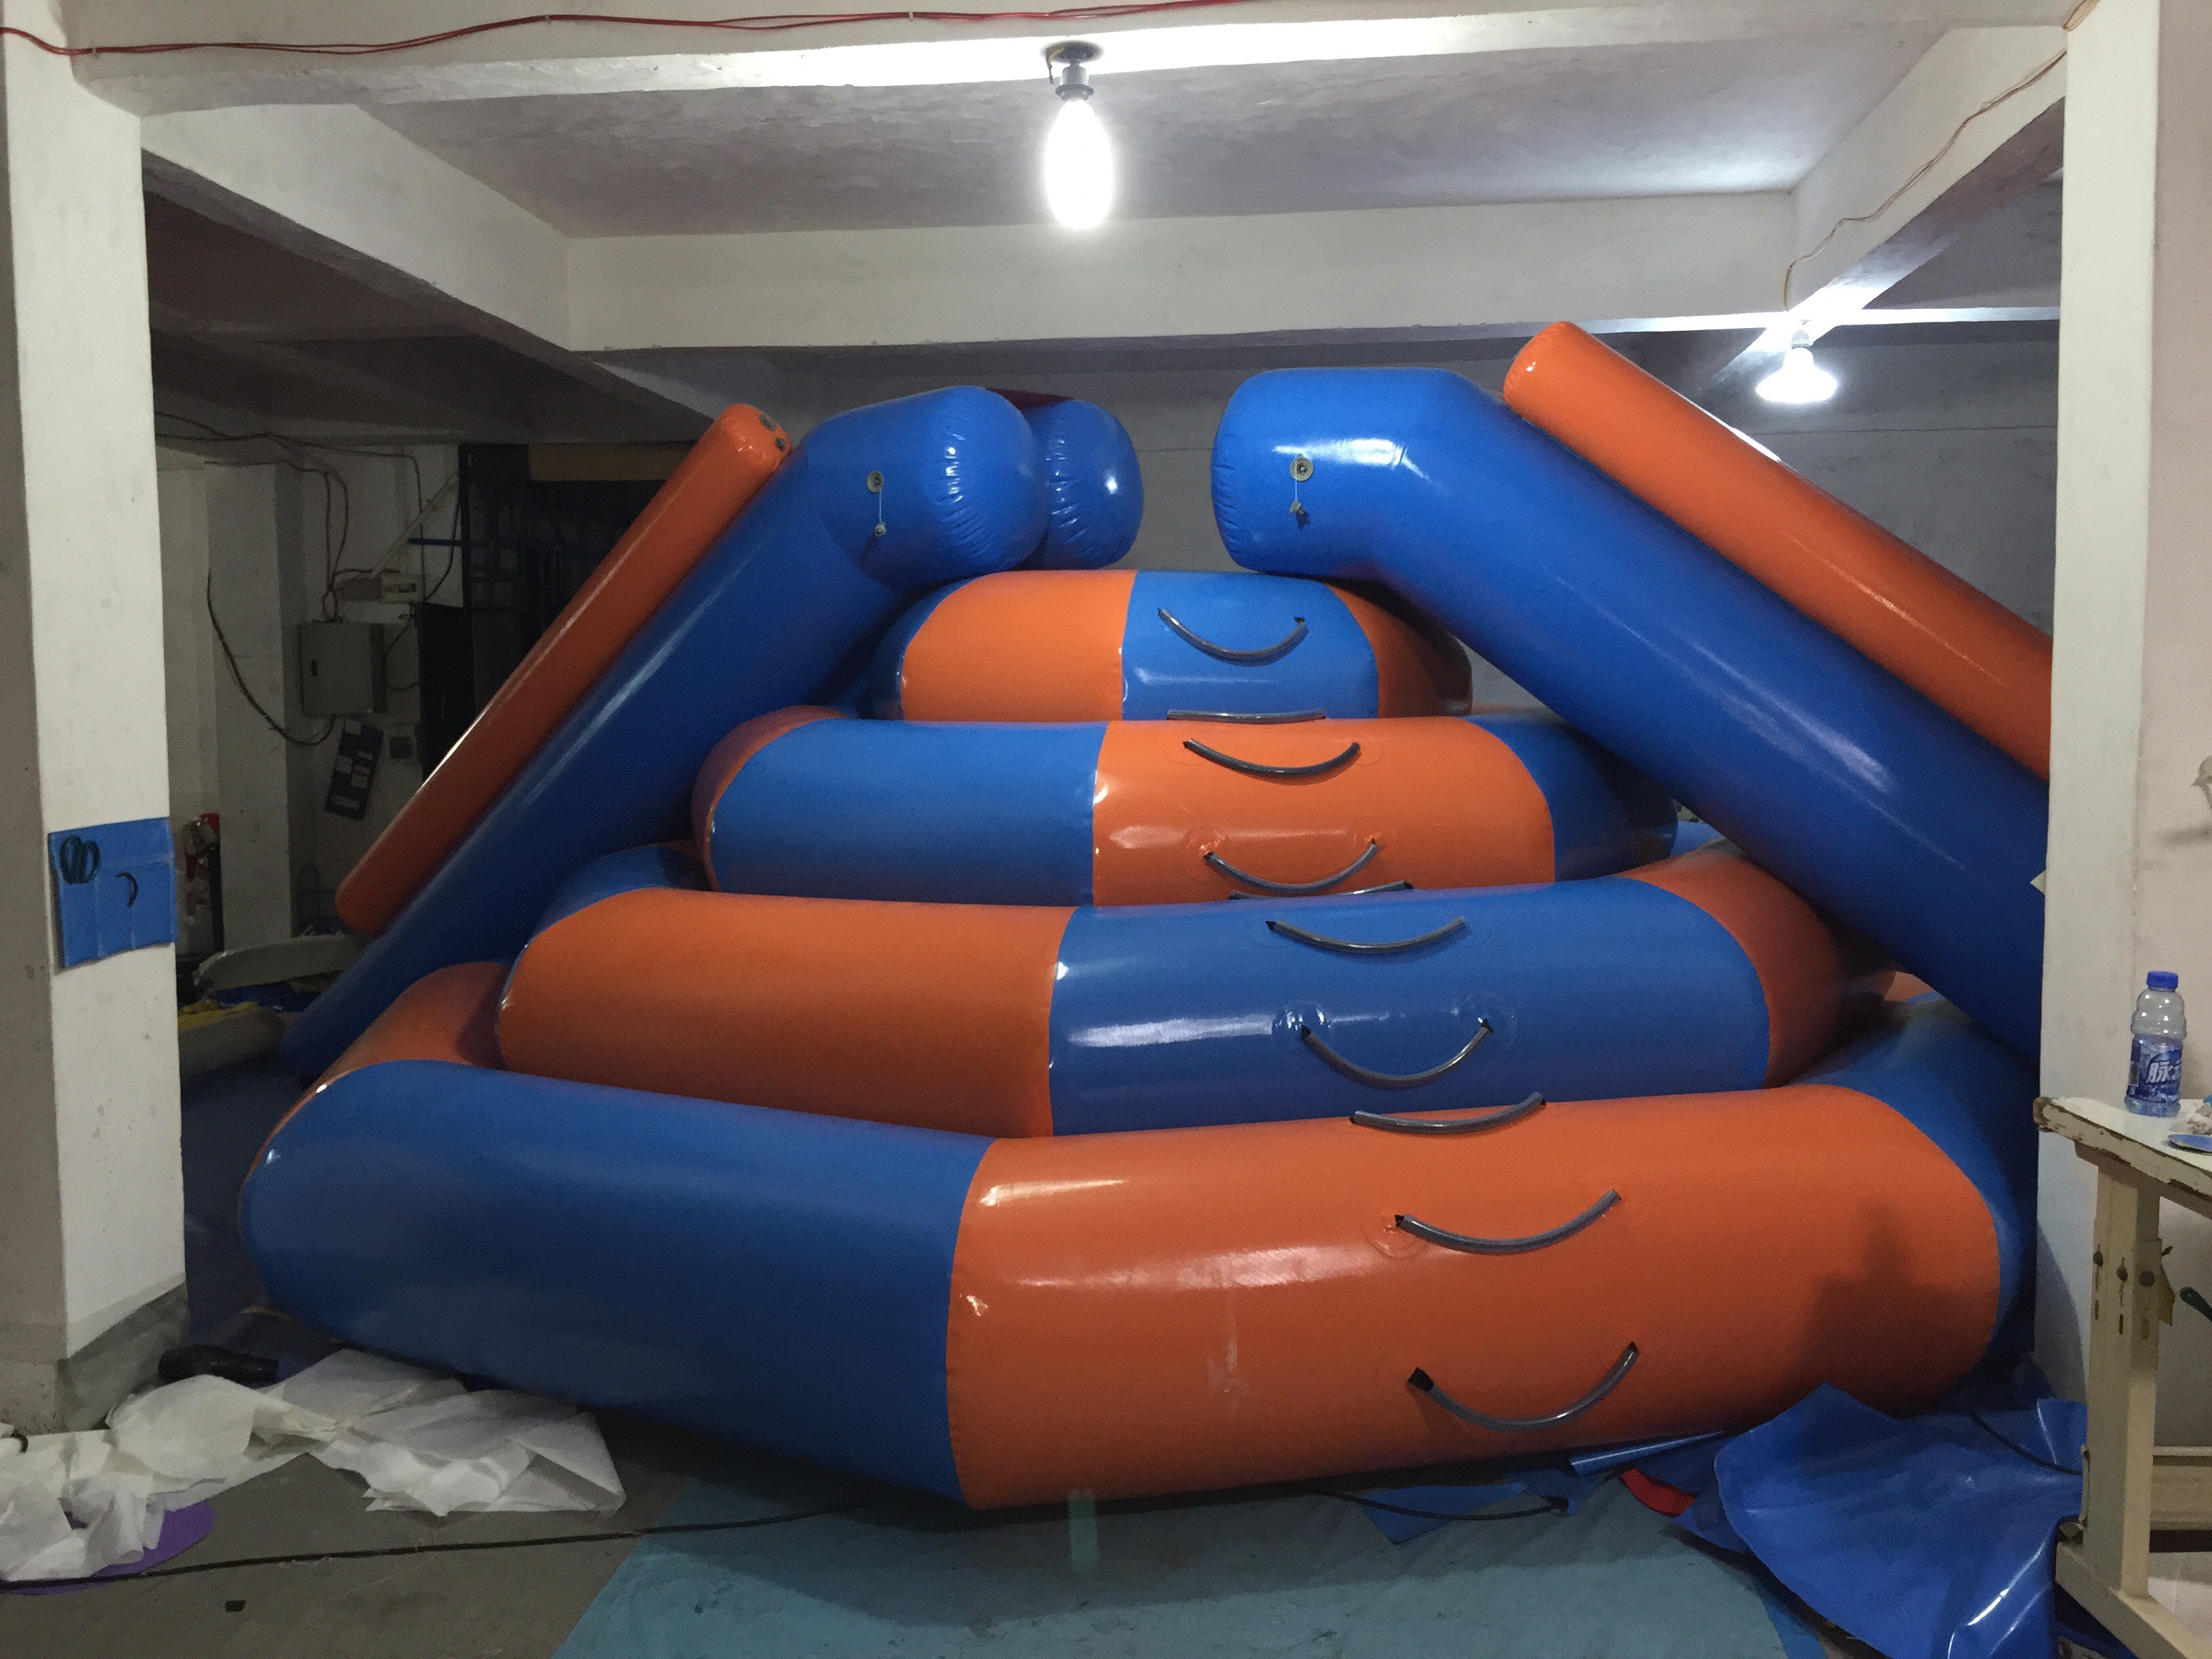 Pyramid Inflatable Slide Cheap Water Park Play Equipment Best Inflatable Floating Water Slide Pyramid Slide Inflatable Water Game Toy Climbing Water Slide aqua Inflatable  Floating tower toys with slide For Kids And Adults Pyramid Slide Inflatable,Pyramid Inflatable Slide